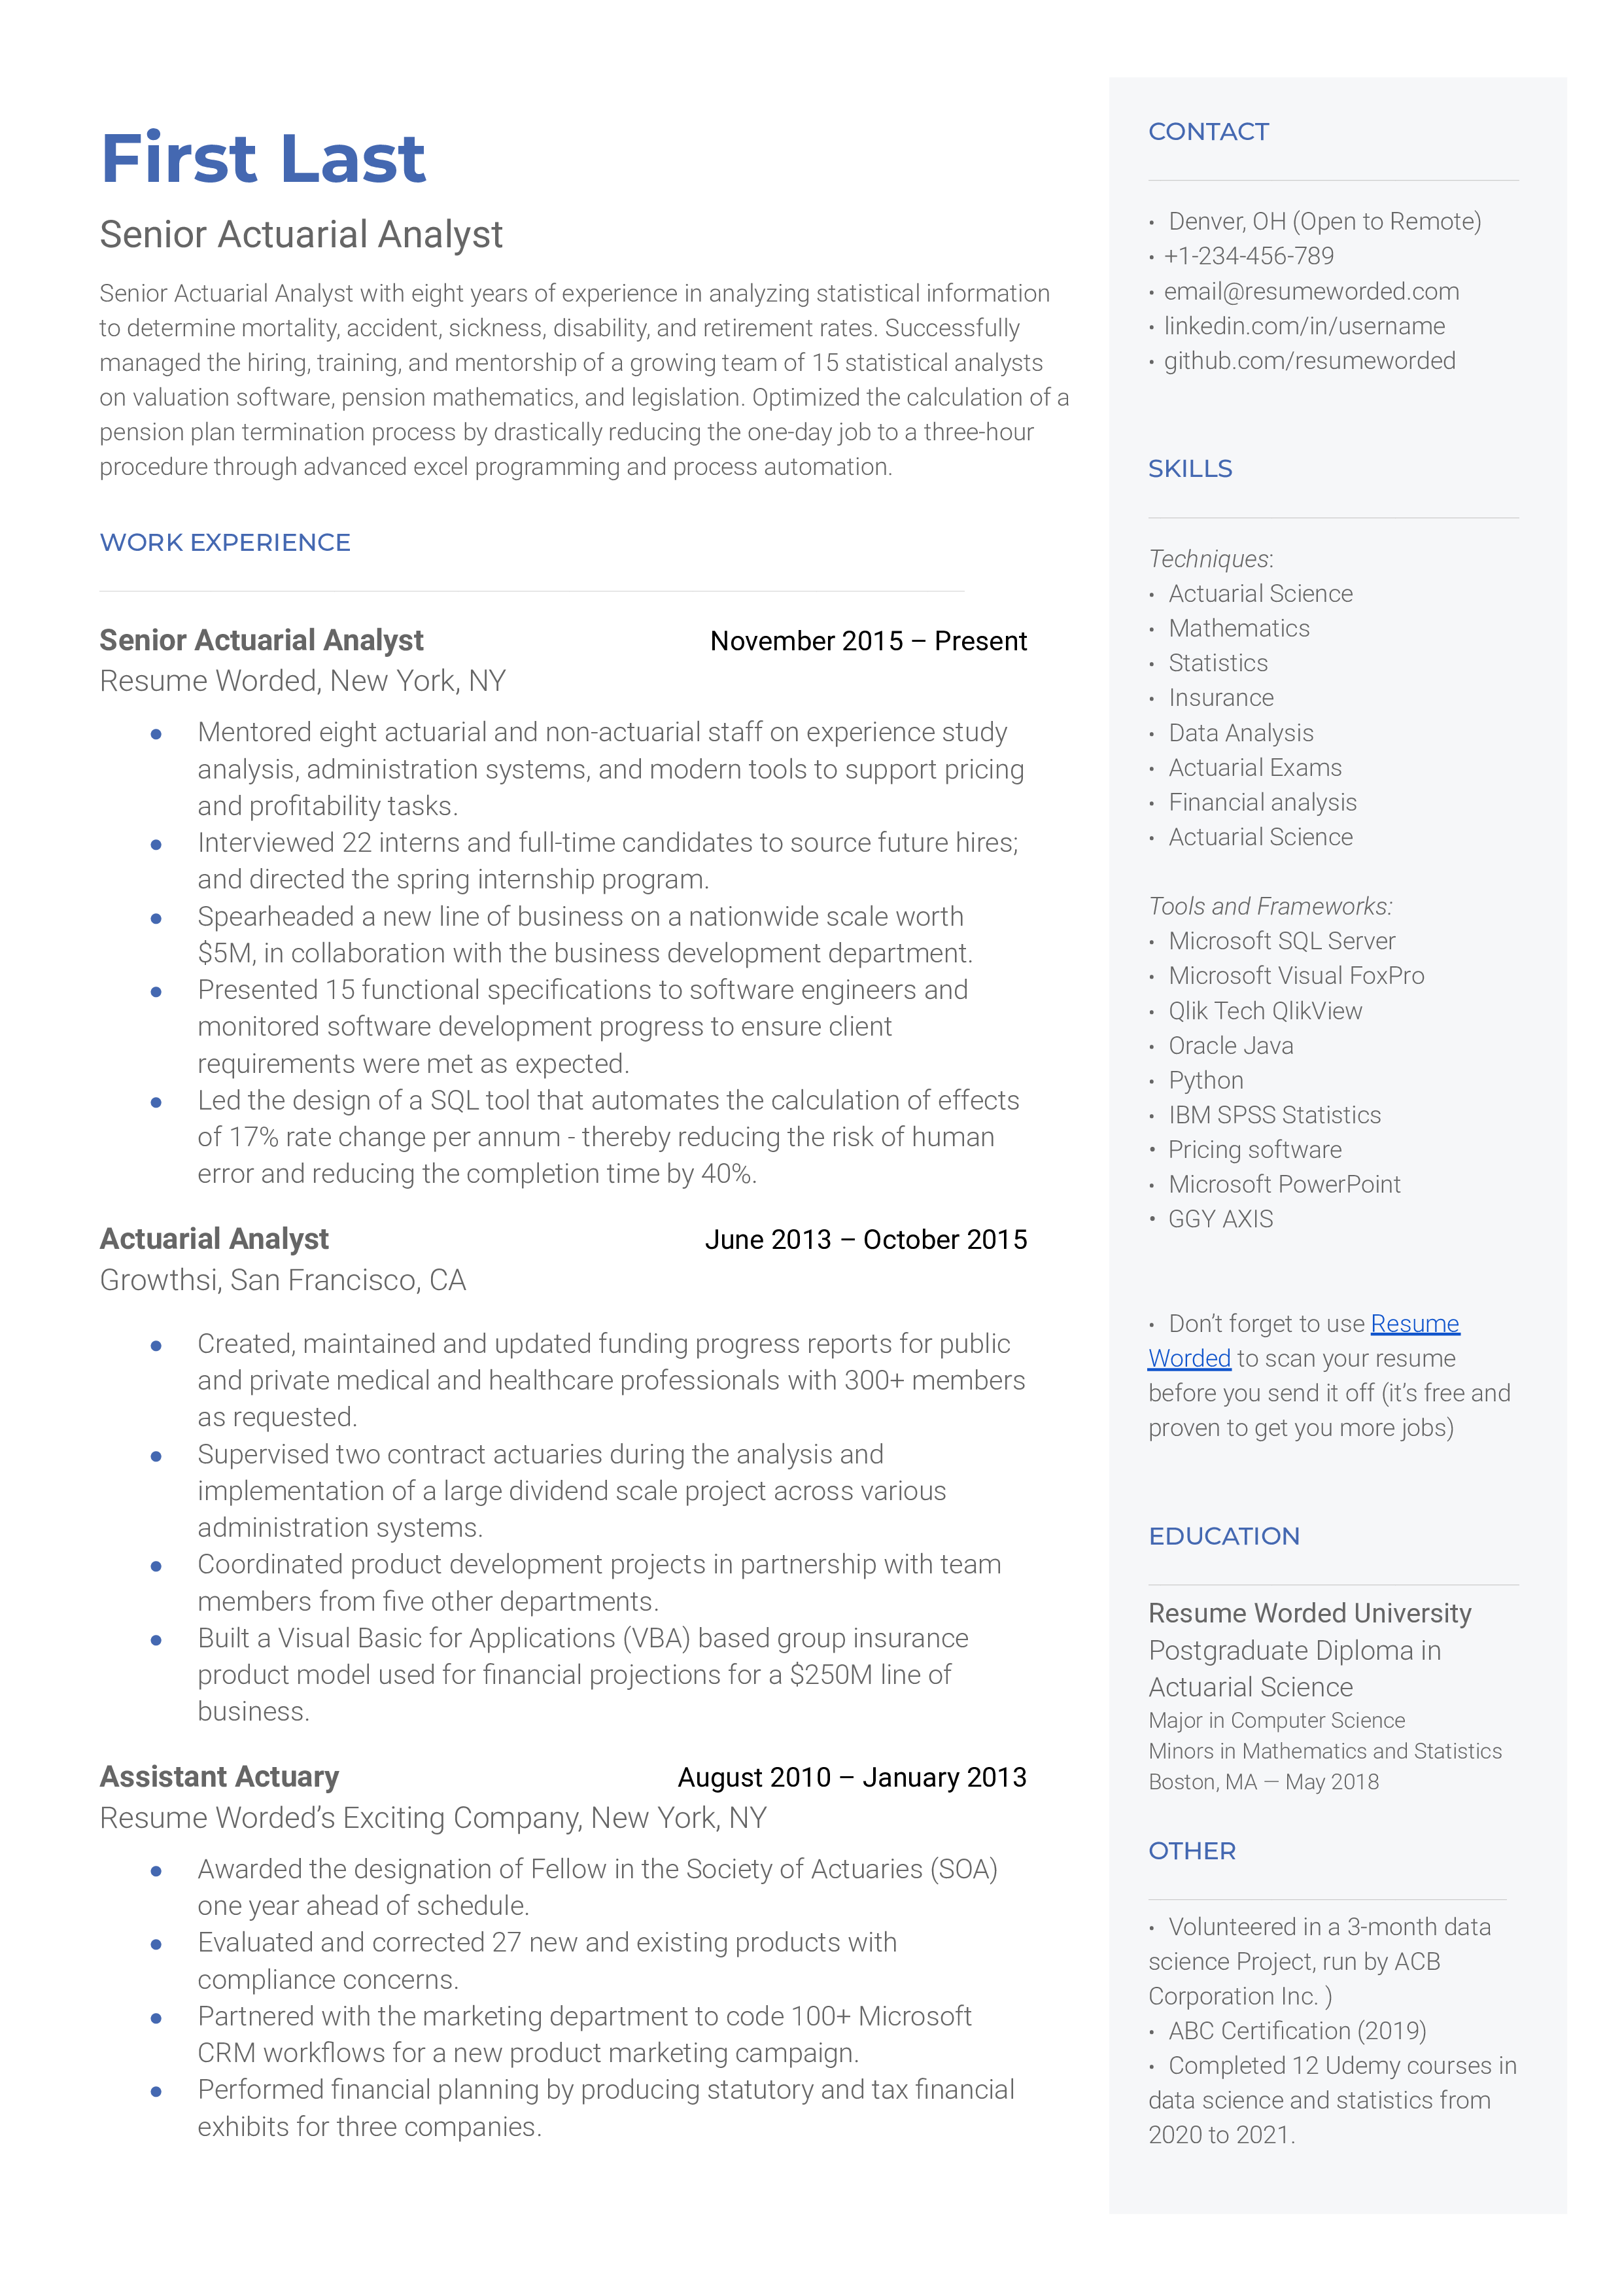 A CV screenshot highlighting statistical software proficiency and risk management experience for a Senior Actuarial Analyst role.